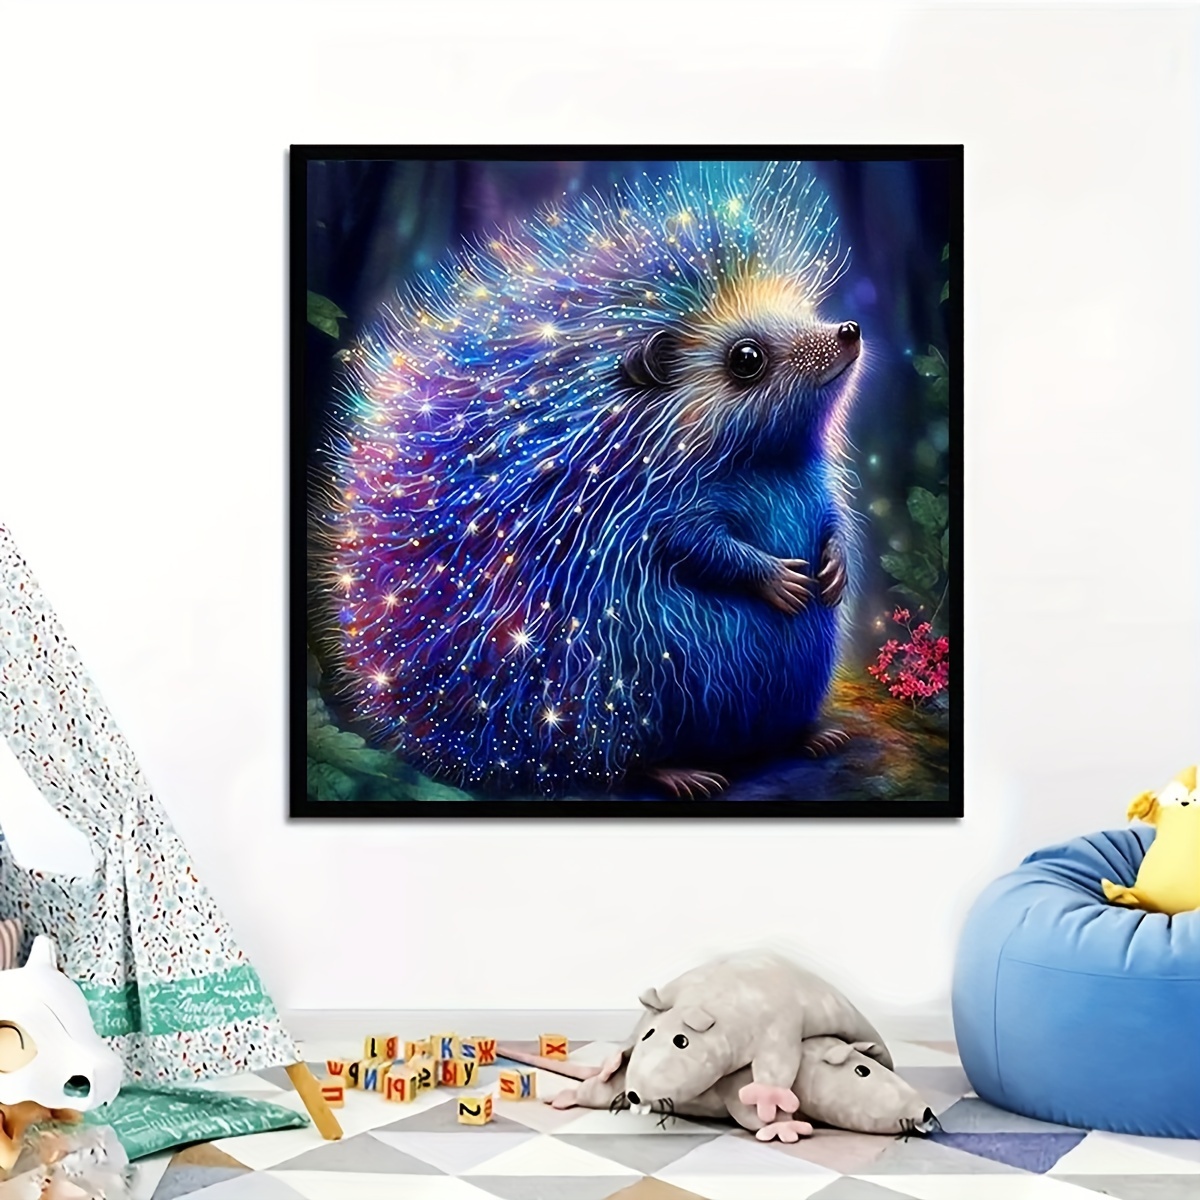 

1 Set, Glowing Hedgehog 5d Diamond Painting Kit For Adults - Diy Embroidery Craft For Home Wall Decor - Full Drill Diamonds - Perfect For Beginners